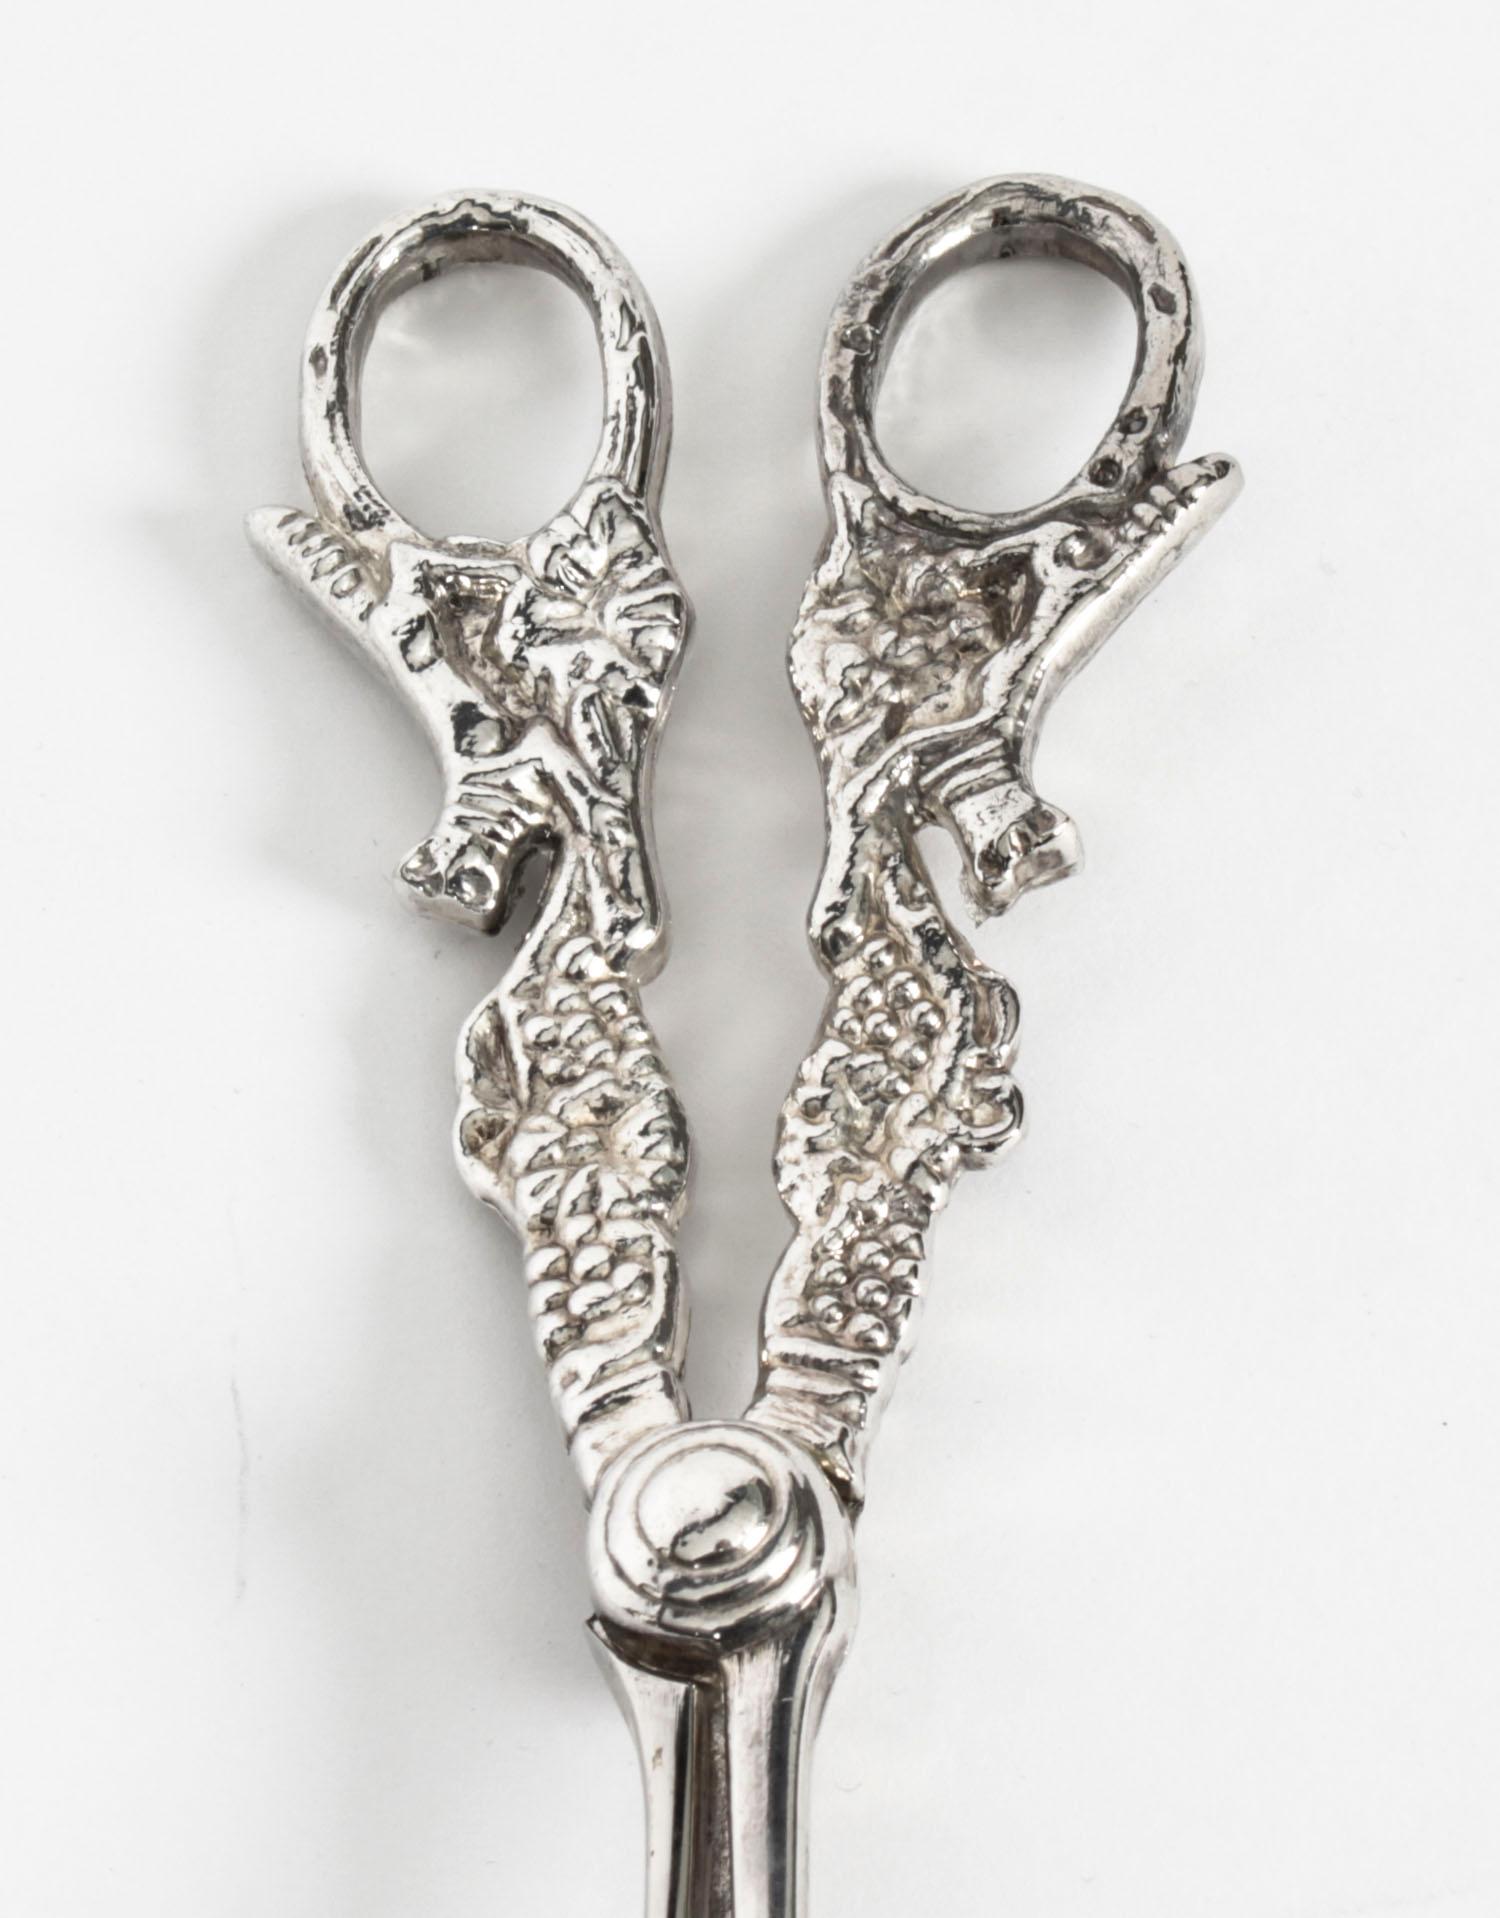 This is a very lovely pair of antique Victorian silver plated grape scissors, circa 1880 in date.

They feature grape vine decoration to the arms with foxes on the handles.

Add an elegant touch to your next dining experience.

Condition:
In